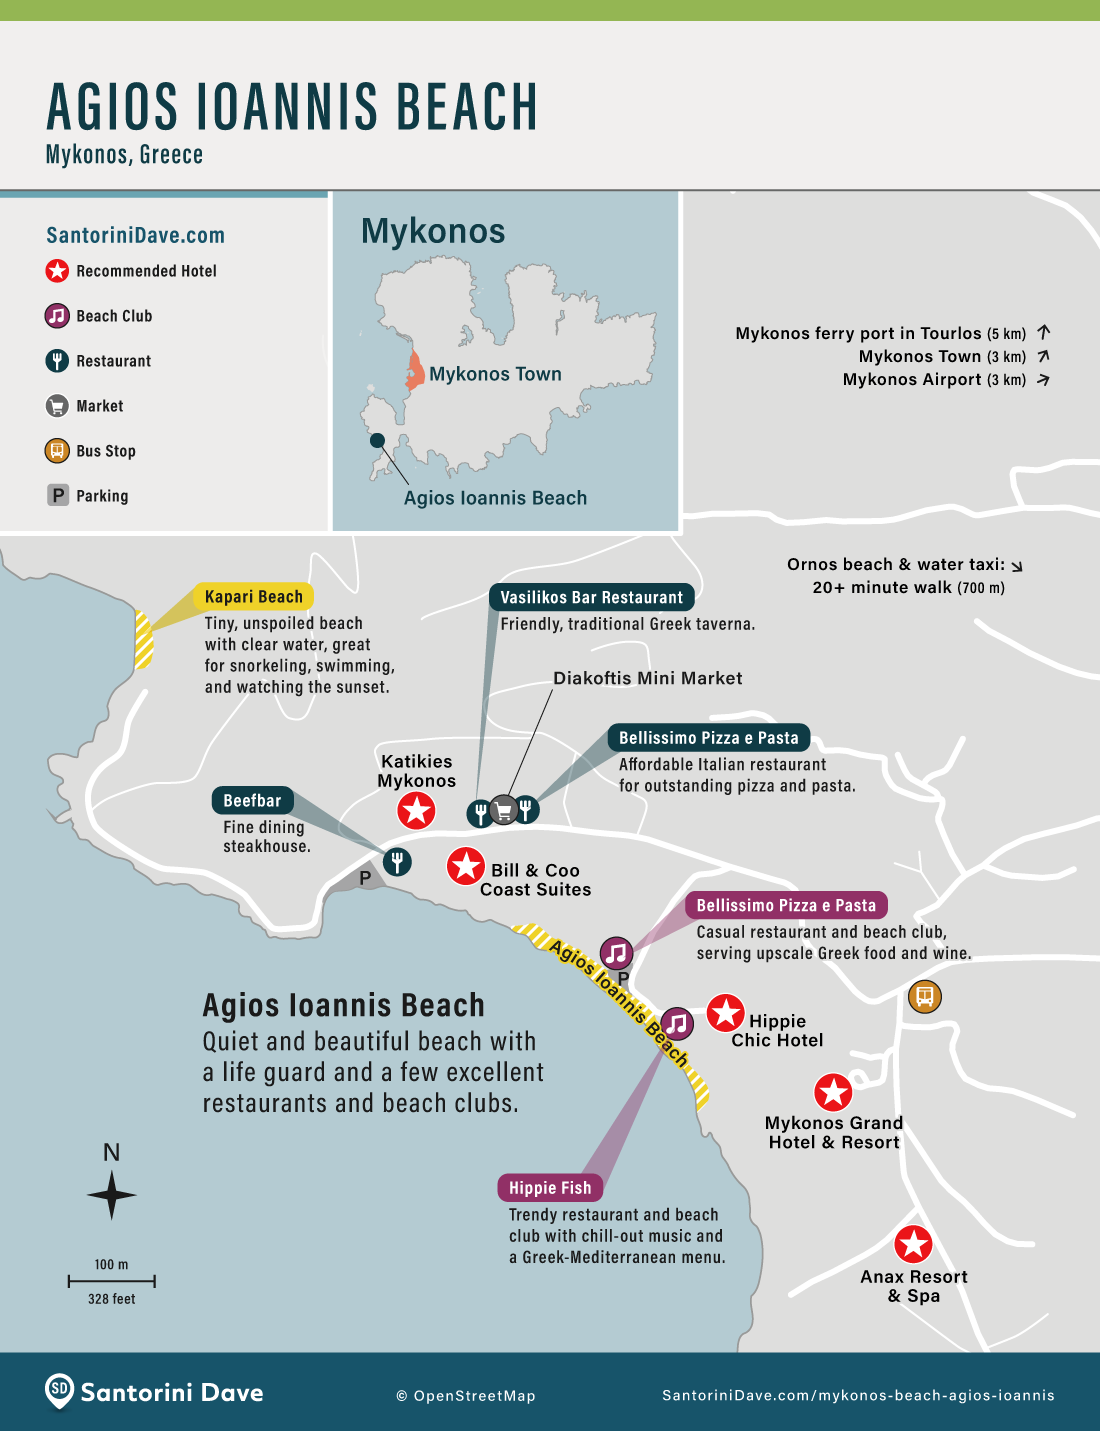 Map showing the best hotels, restaurants, and attractions at and near Agios Ioannis beach in Mykonos